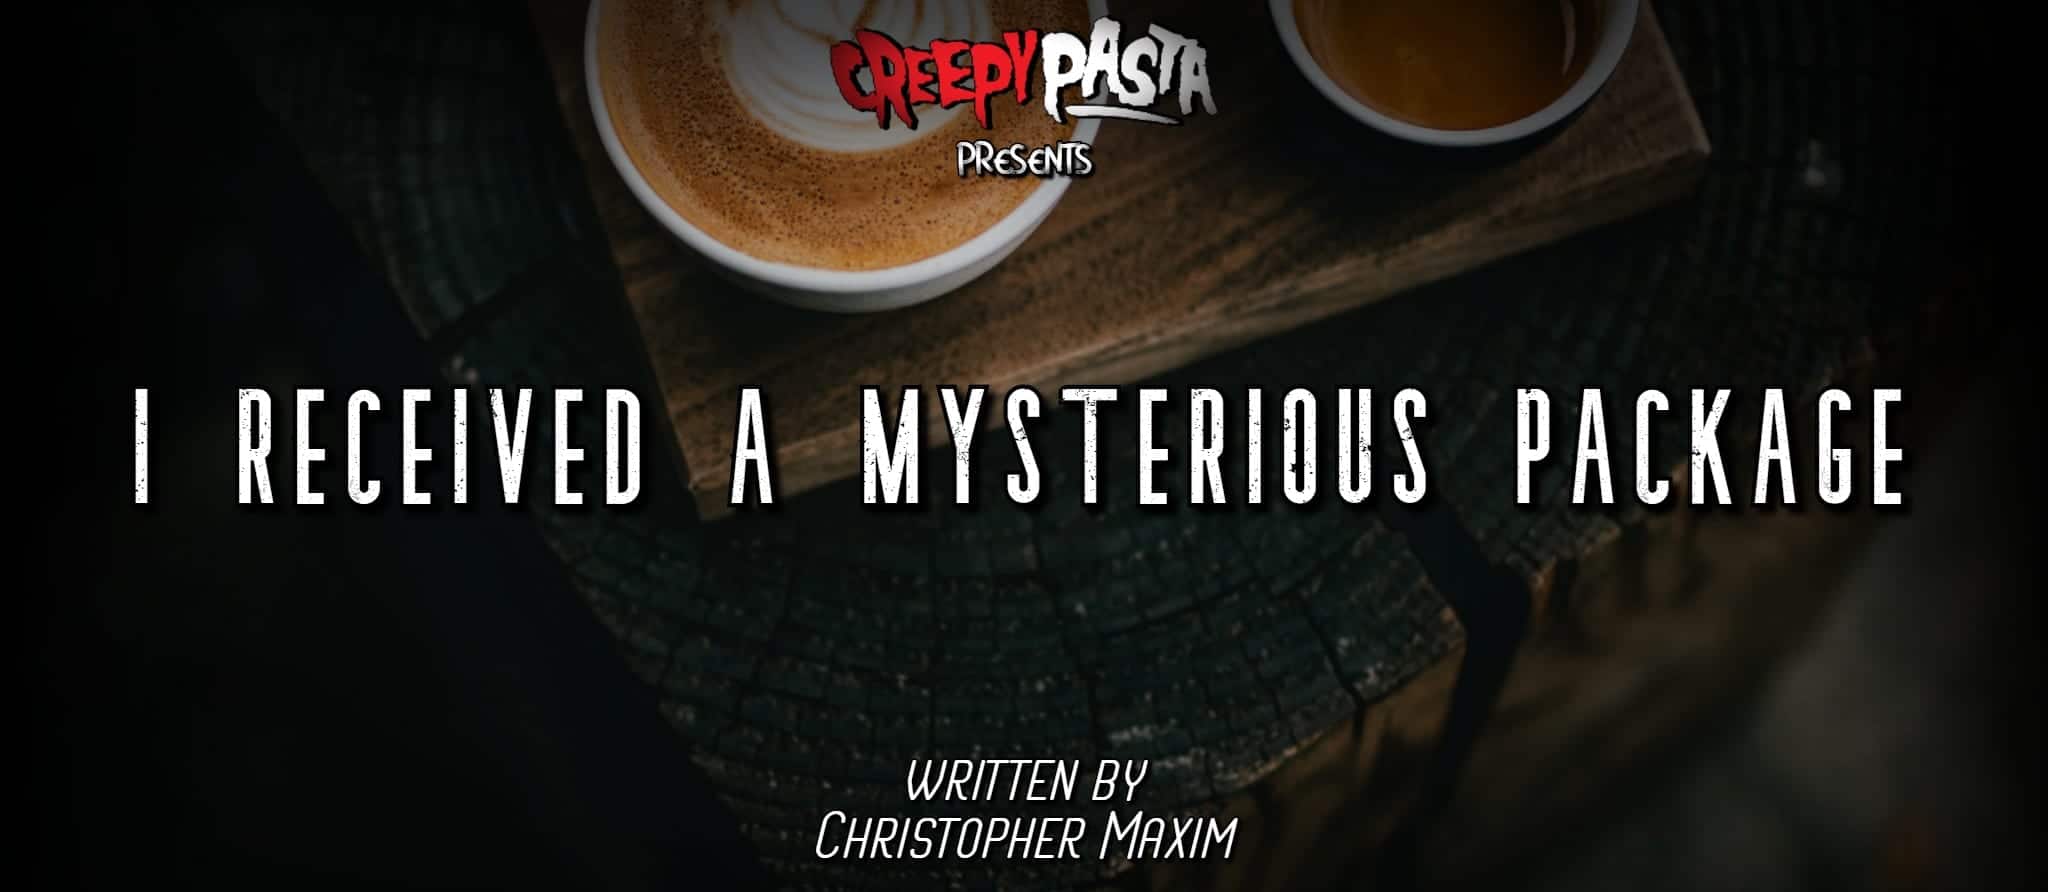 I Received a Mysterious Package in the Mail - Creepypasta